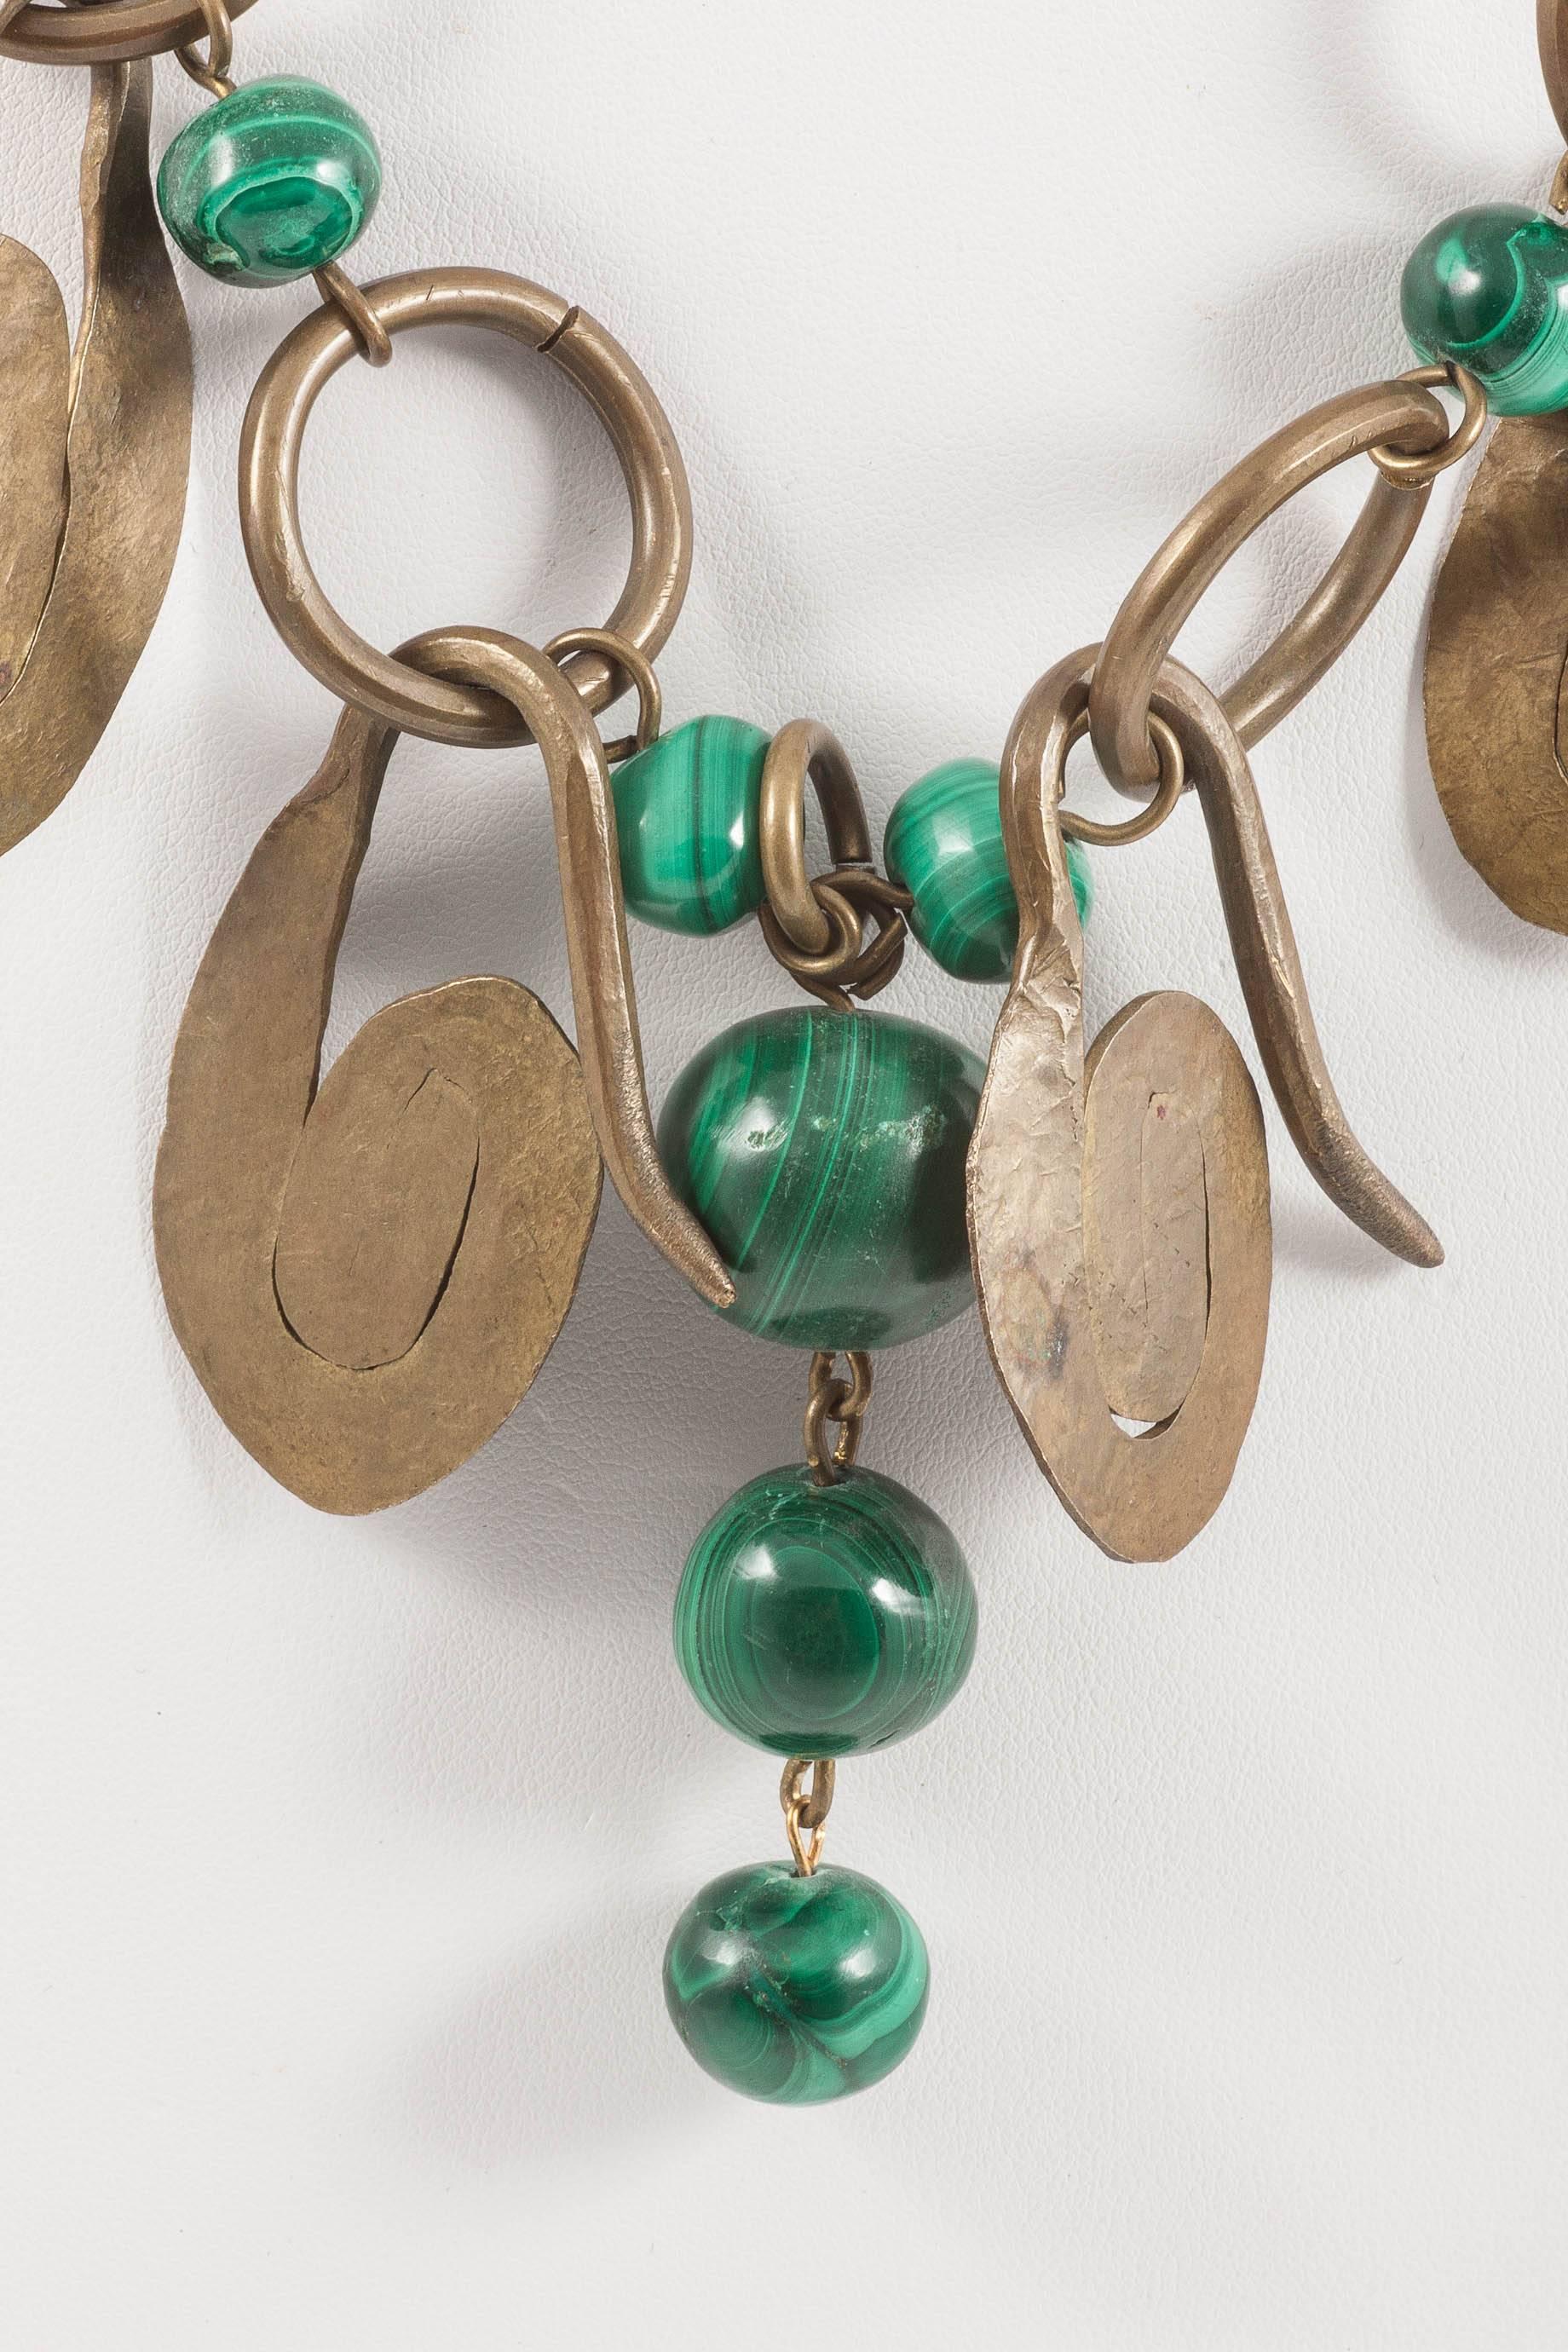 This is a fantastic artisan made necklace from the late 1950s or early 1960s. Made of brass hammered swirls and solid malachite beads of graduating size, it is a great Summer piece, with anything from khaki and white with jeans, to a full on